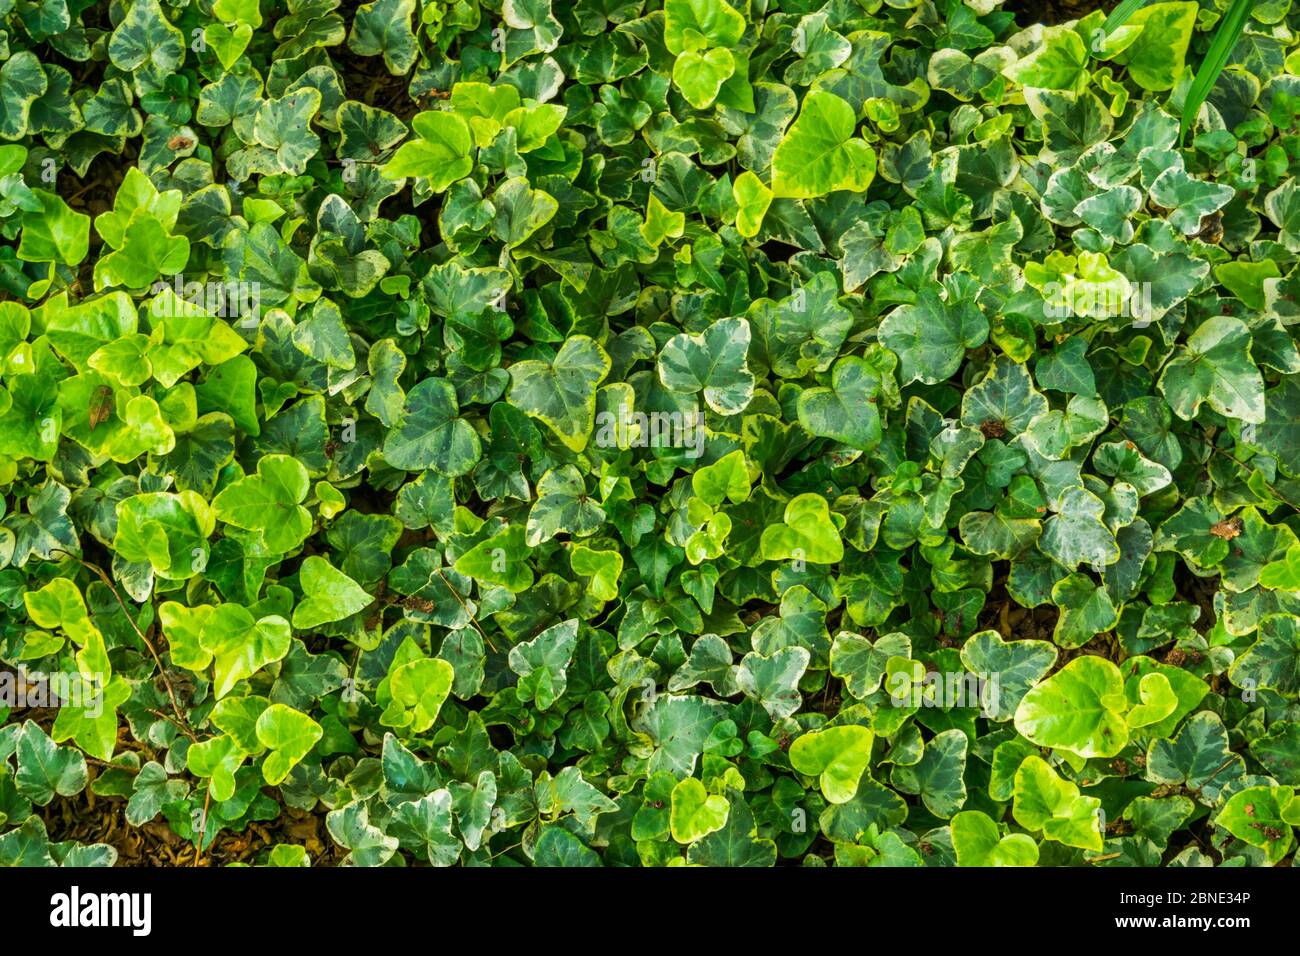 the leaves of a yellow variegated ivy plant in closeup, special ornamental cultivated specie Stock Photo